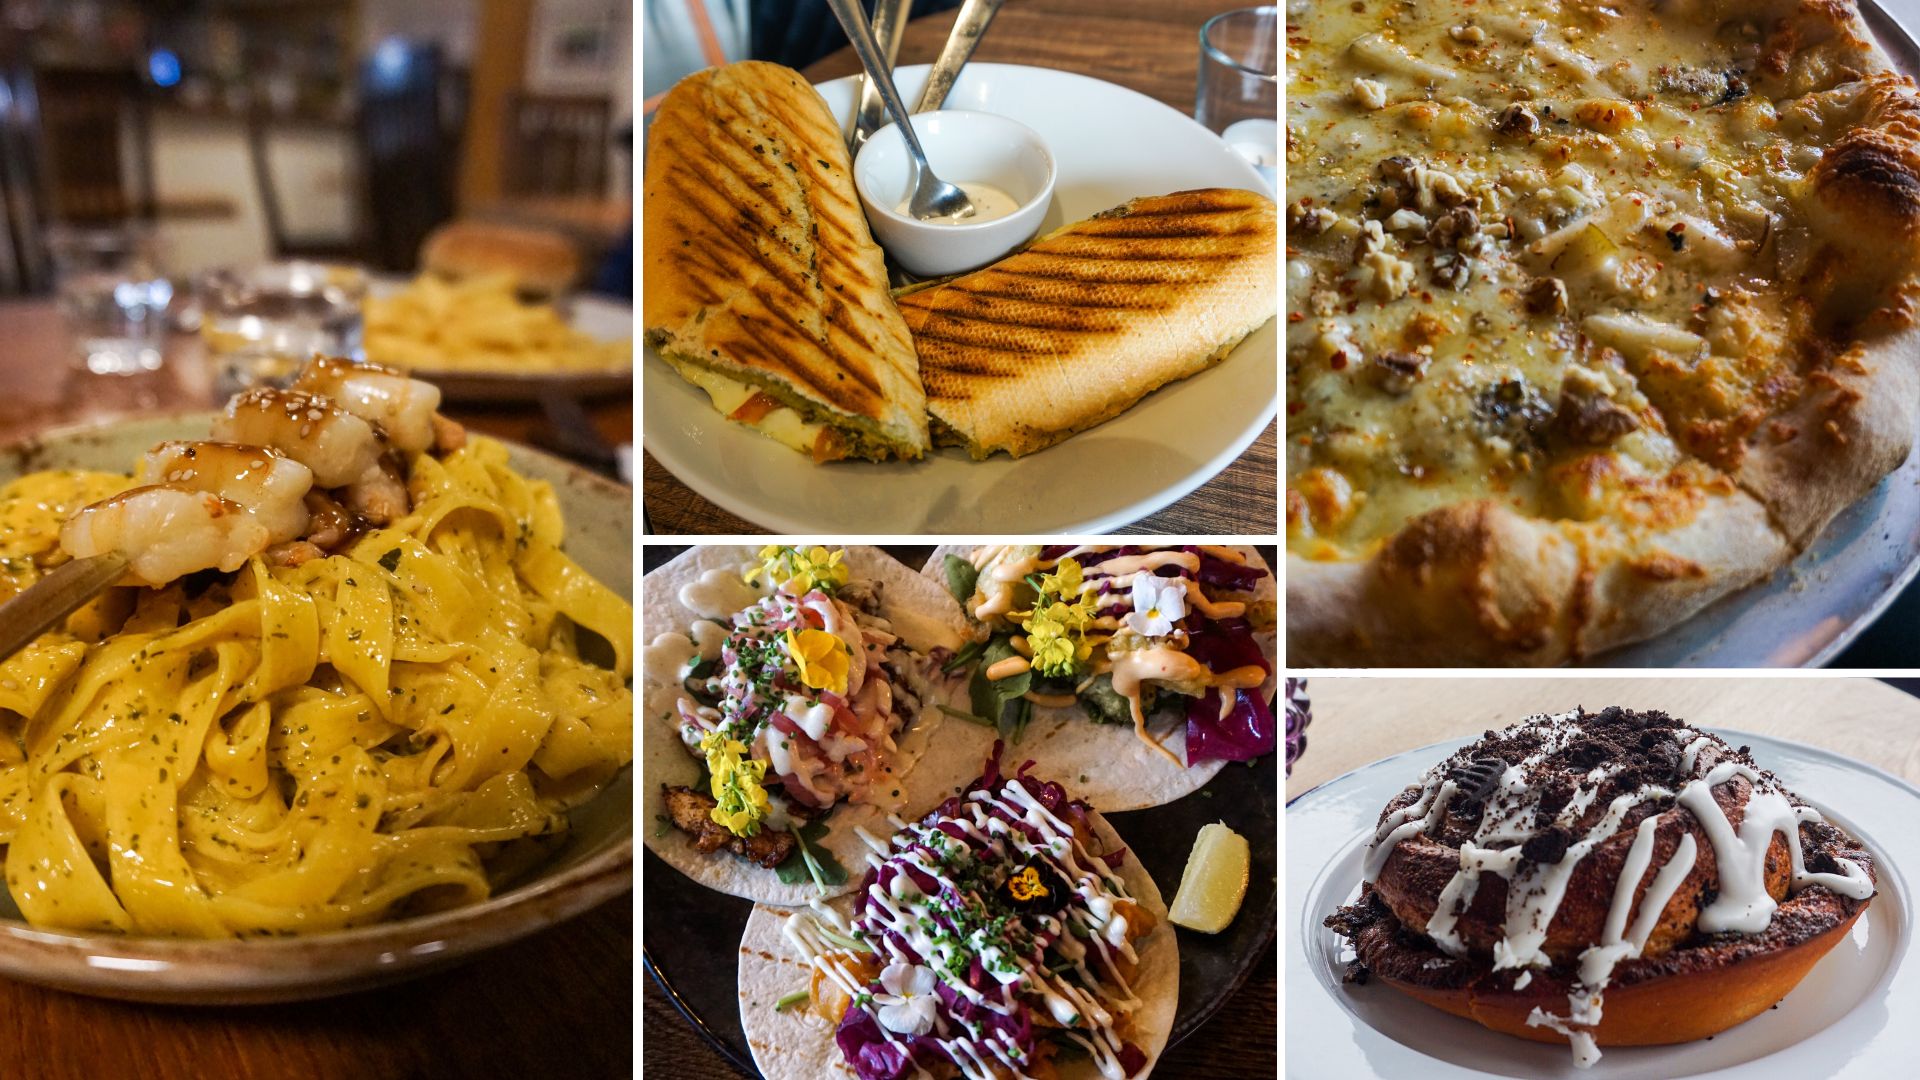 Collage of foods from Iceland, clockwise from top right: pizza, cinnamon bun with oreo, selection of tacos, pasta with shrimps and panini sandwich with cheese